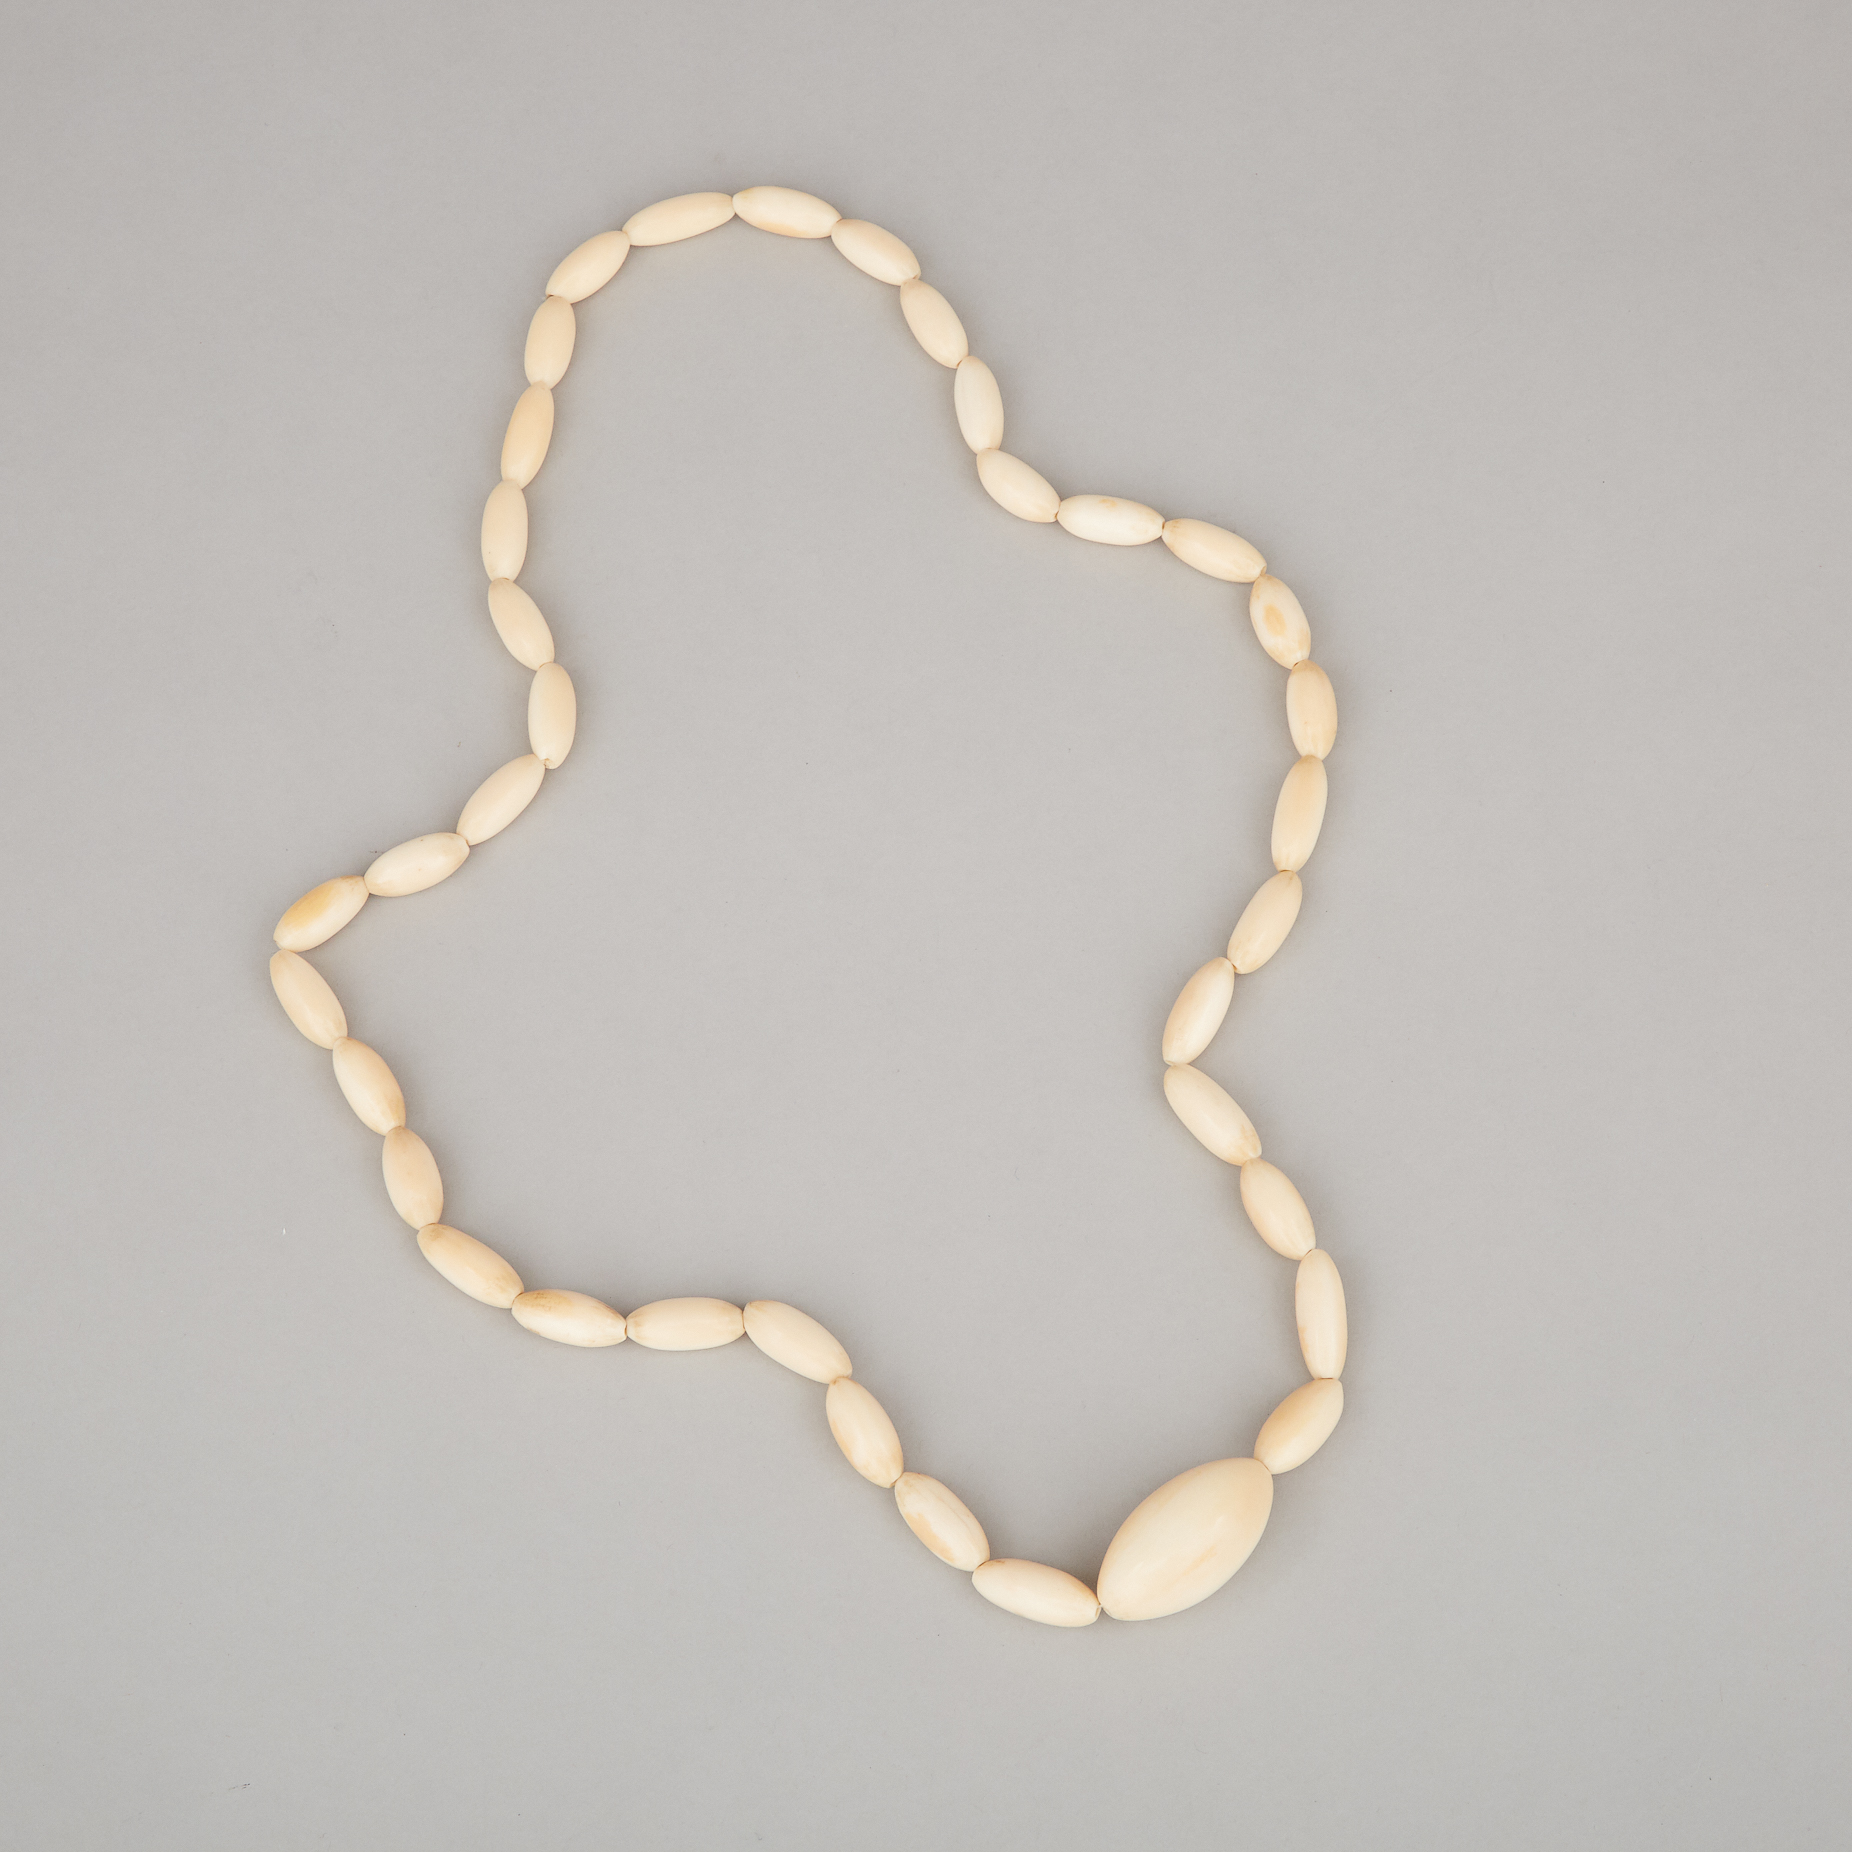 An Ivory Carved Oval Bead Necklace, Mid-20th Century